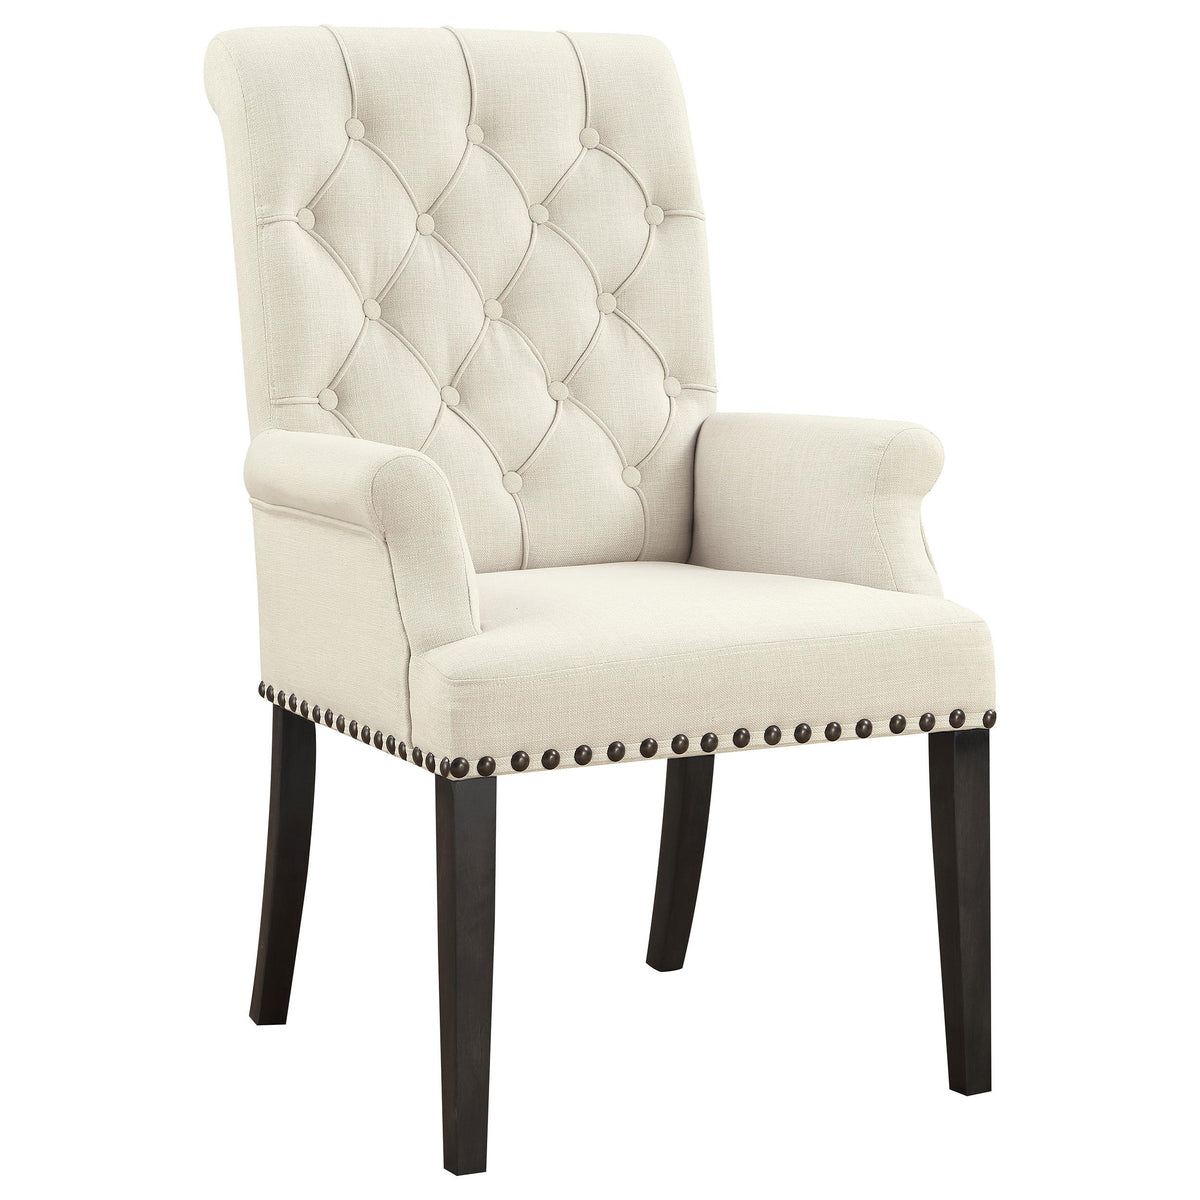 Alana Upholstered Arm Chair Beige and Smokey Black  Las Vegas Furniture Stores